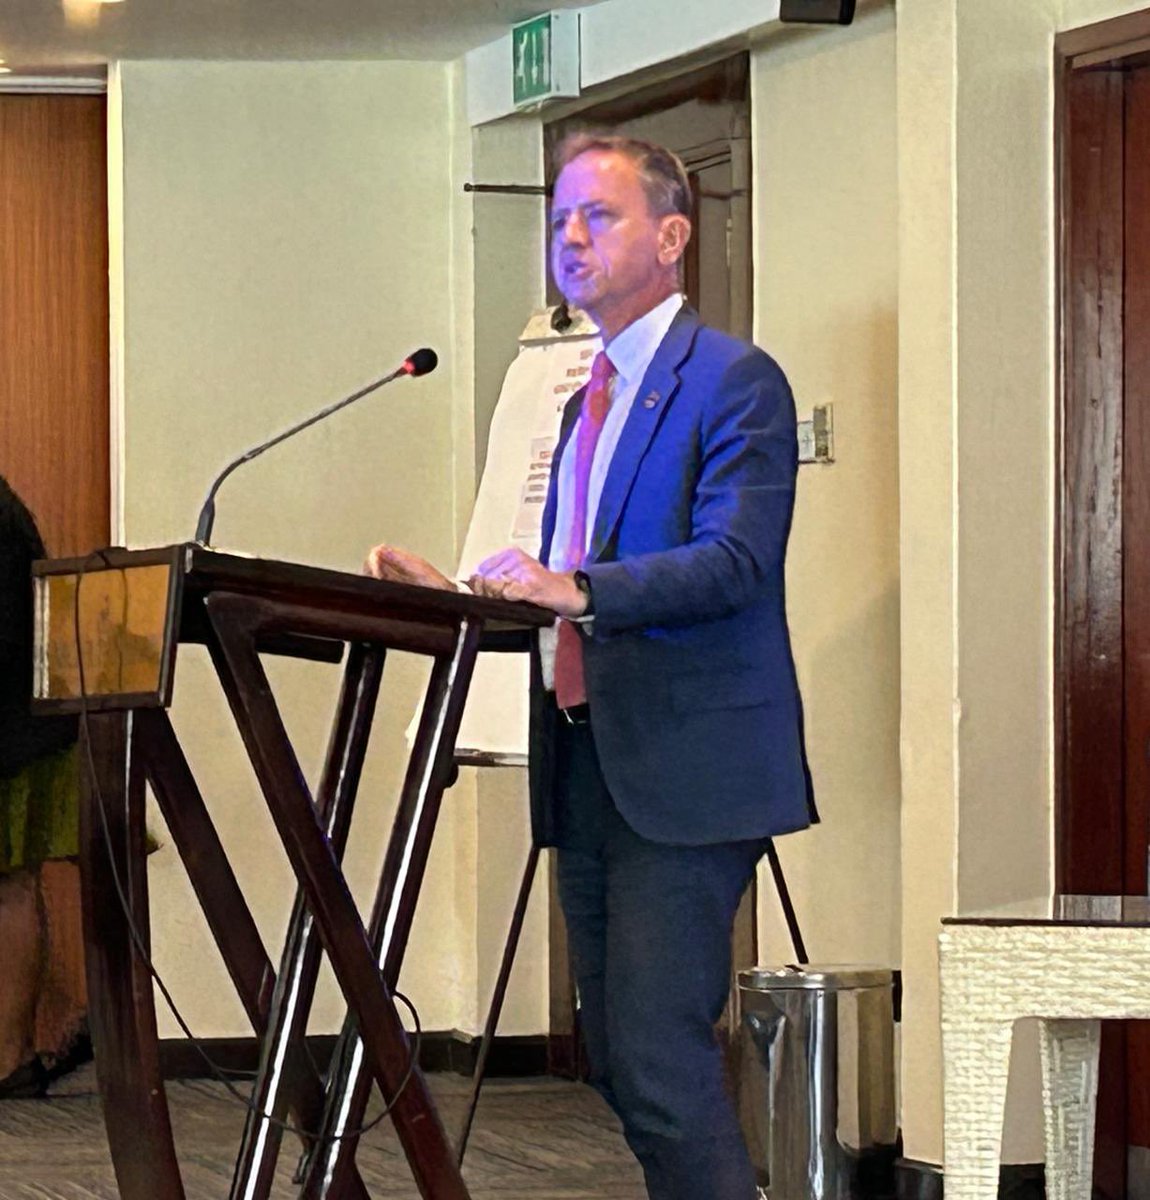 Every $ or KES invested in #Data for #SustainableDevelopment sees a 30-fold return. That’s the #PowerOfData. Proud to help launch the Kenya Power of Data High-Impact Initiative & National Data Partnership today with @SectoCabinet_KE @pthigo & @clairemelamed